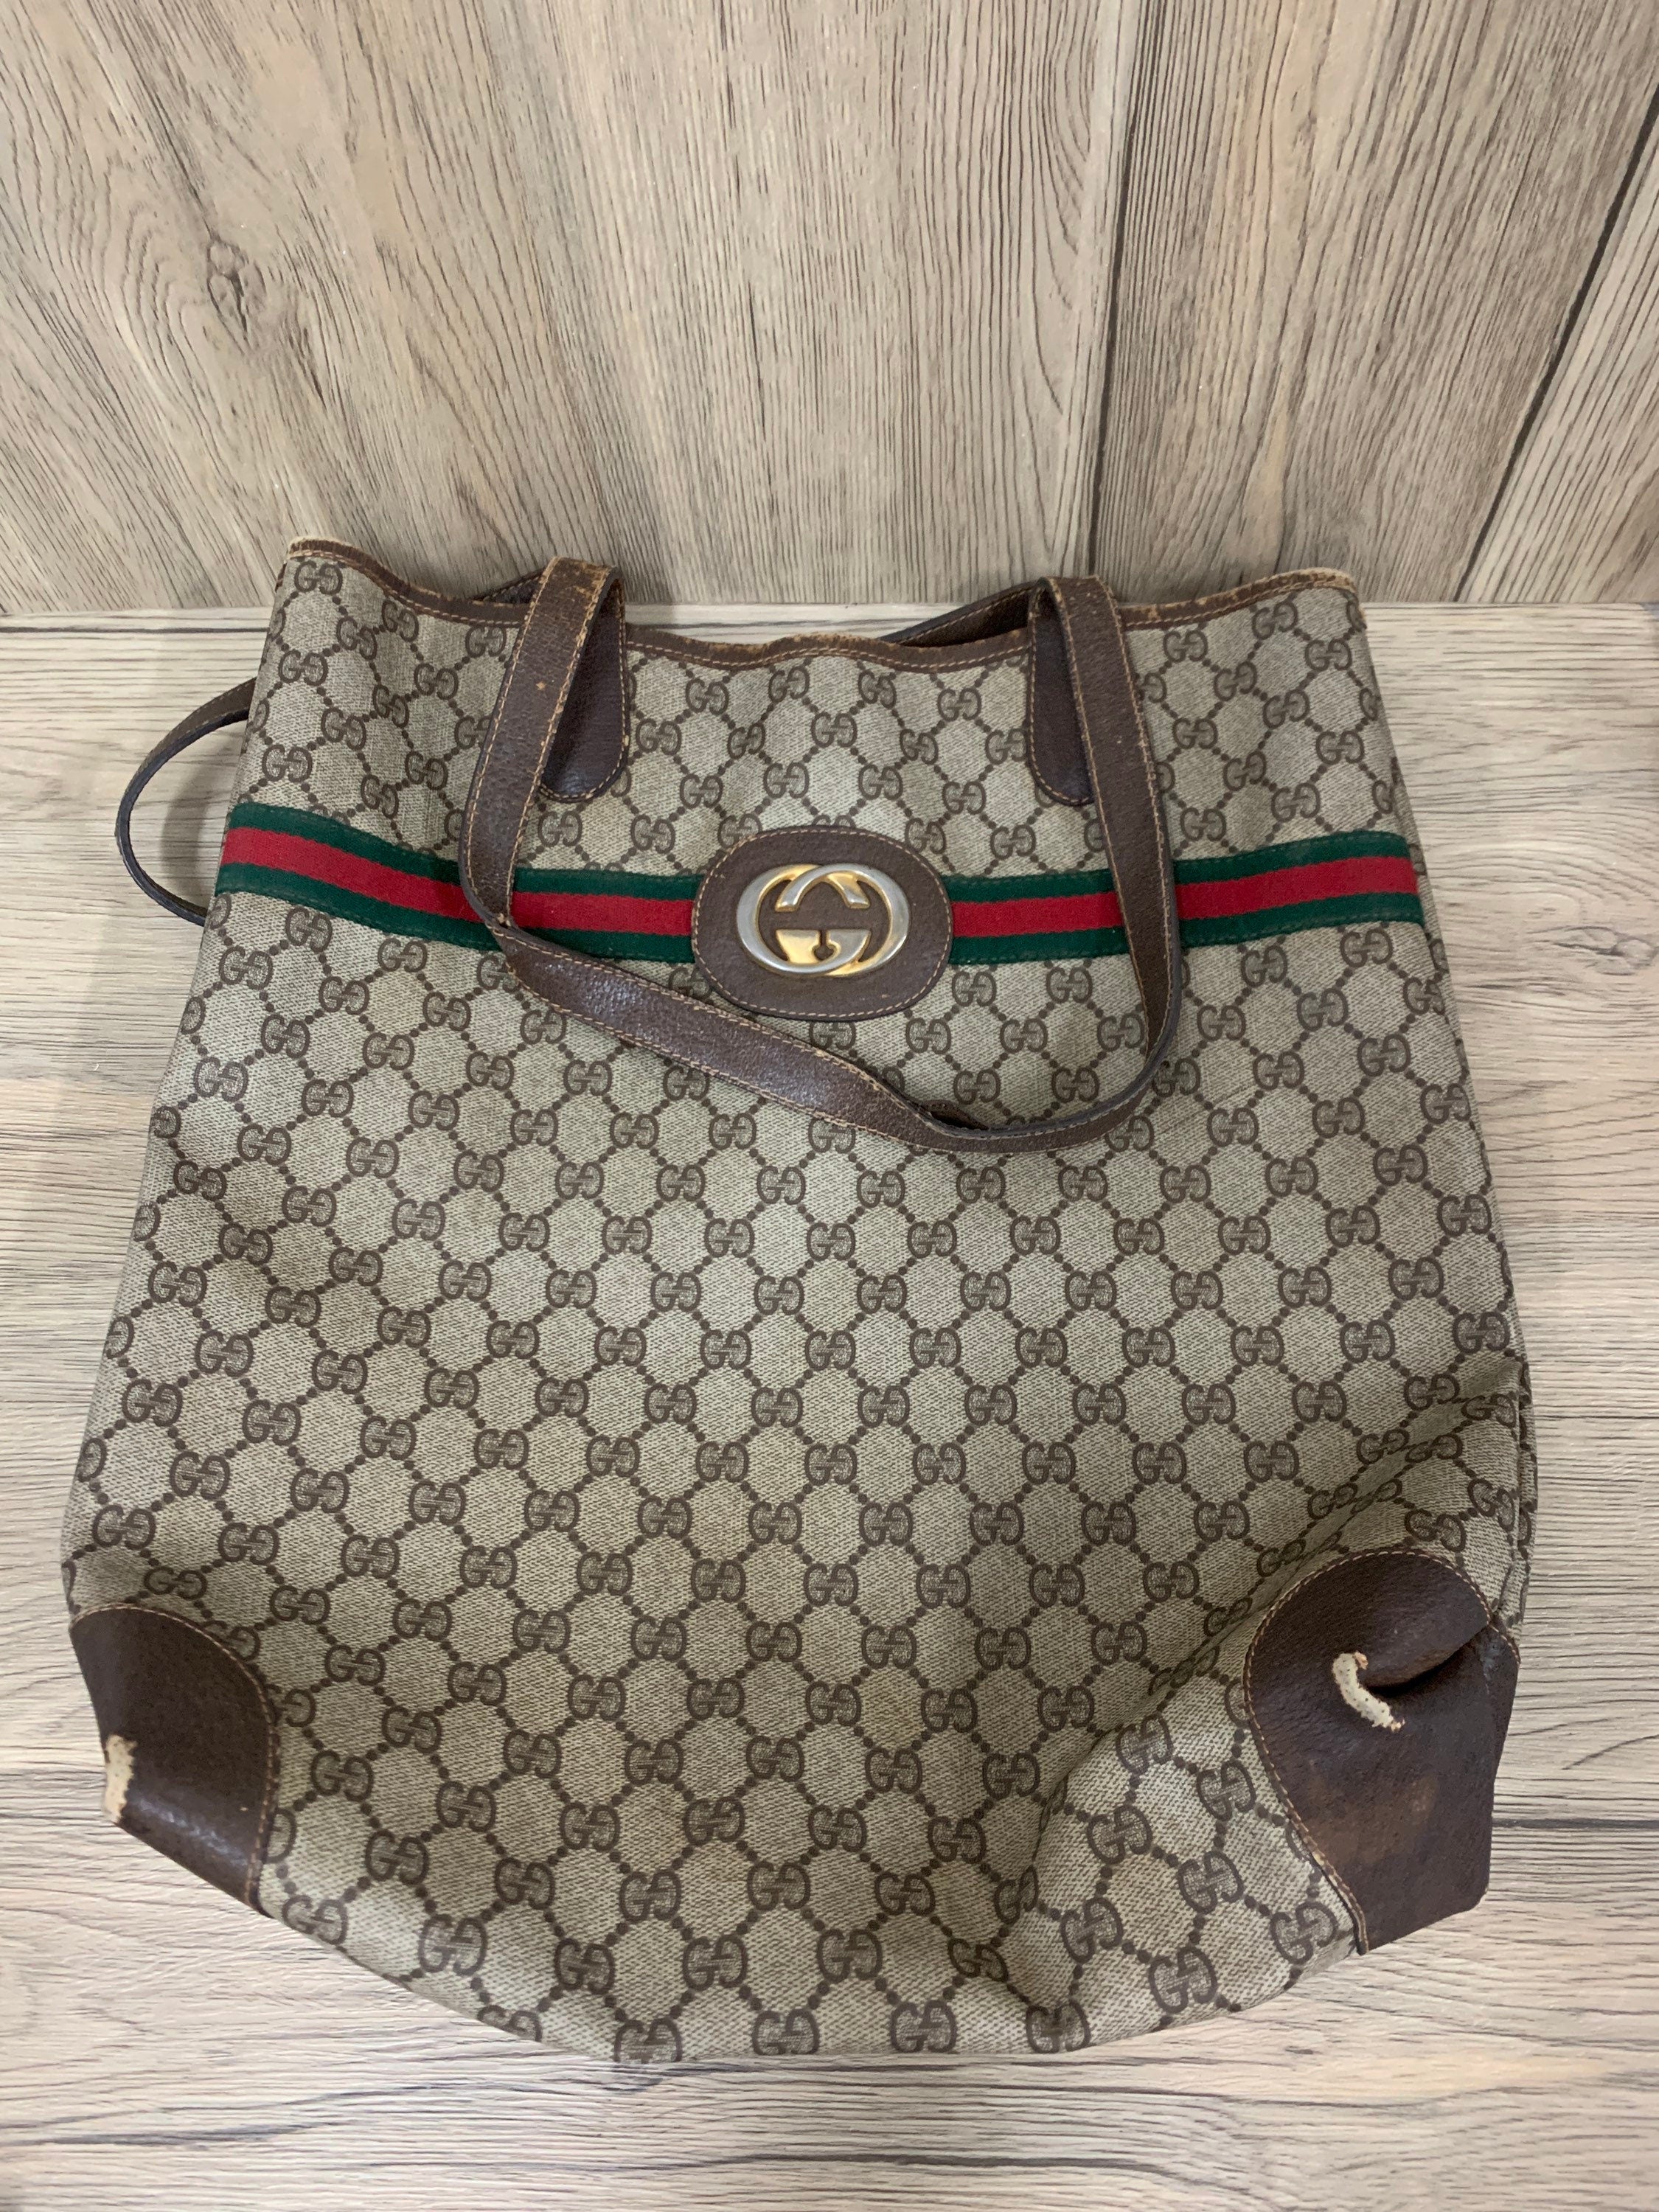 Are Gucci purses made in China? - Questions & Answers | 1stDibs